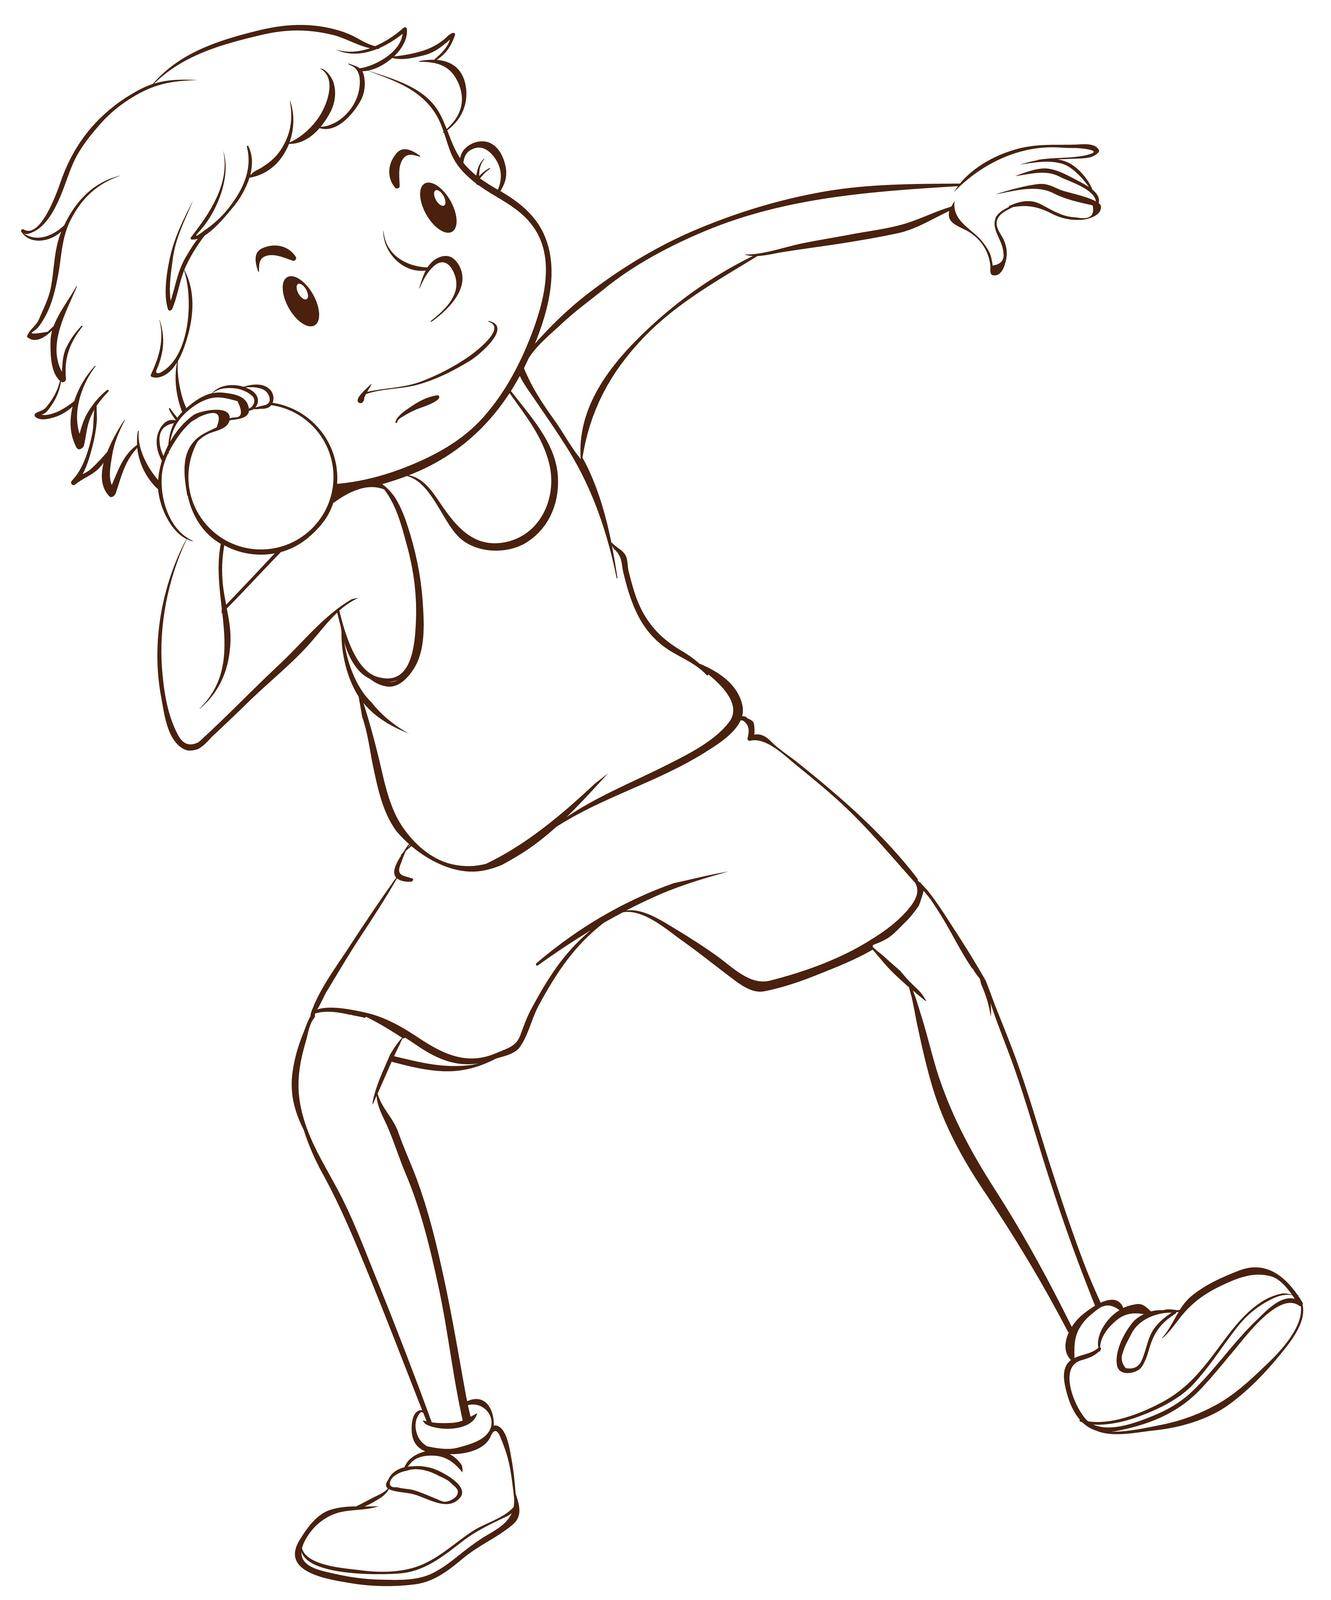 Illustration of an athlete throwing weight